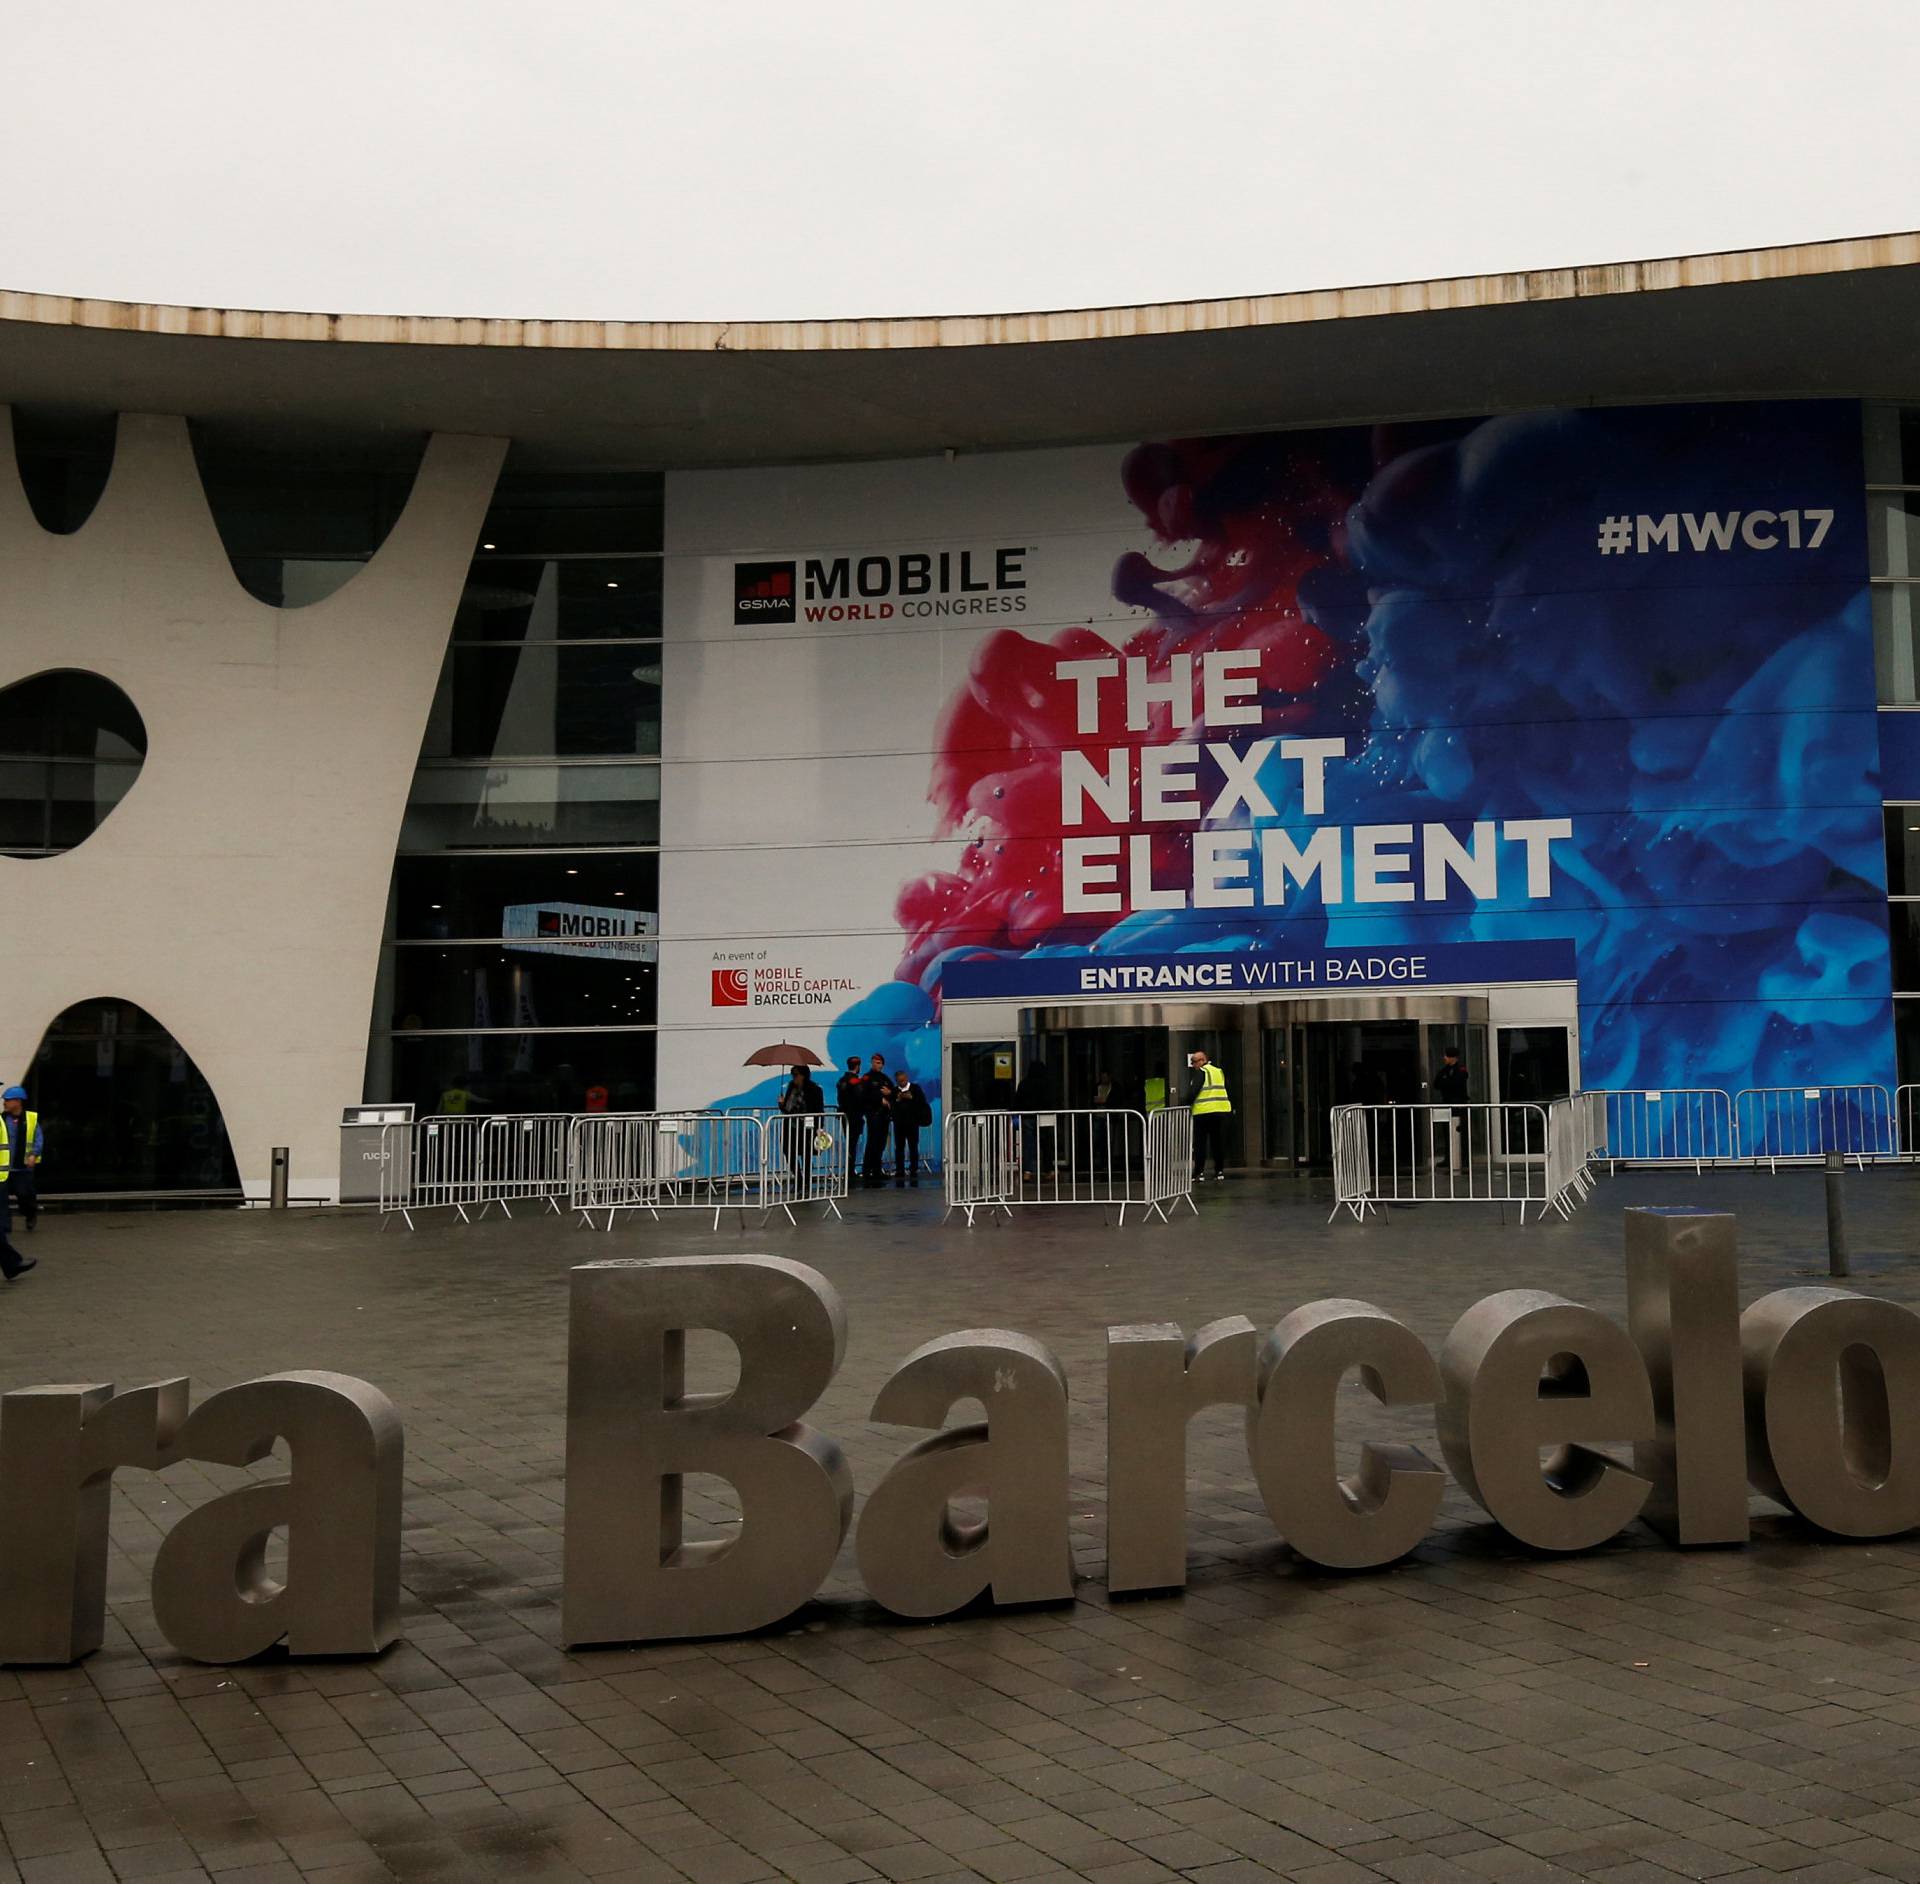 Workers walk past the main entrance of the Mobile World Congress in Barcelona